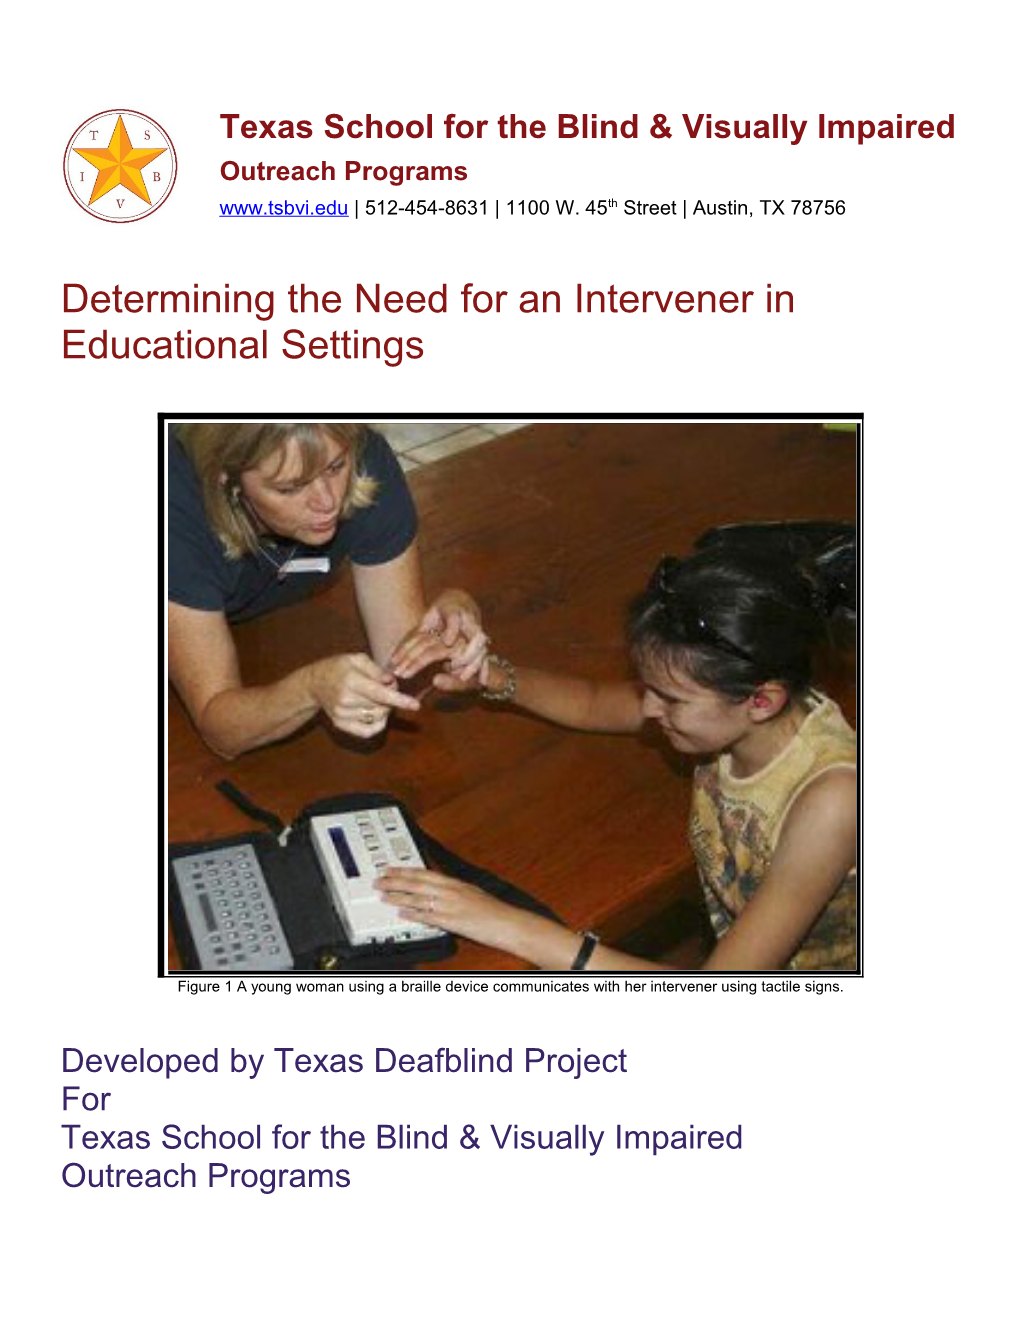 Determining the Need for an Intervener in Educational Settings